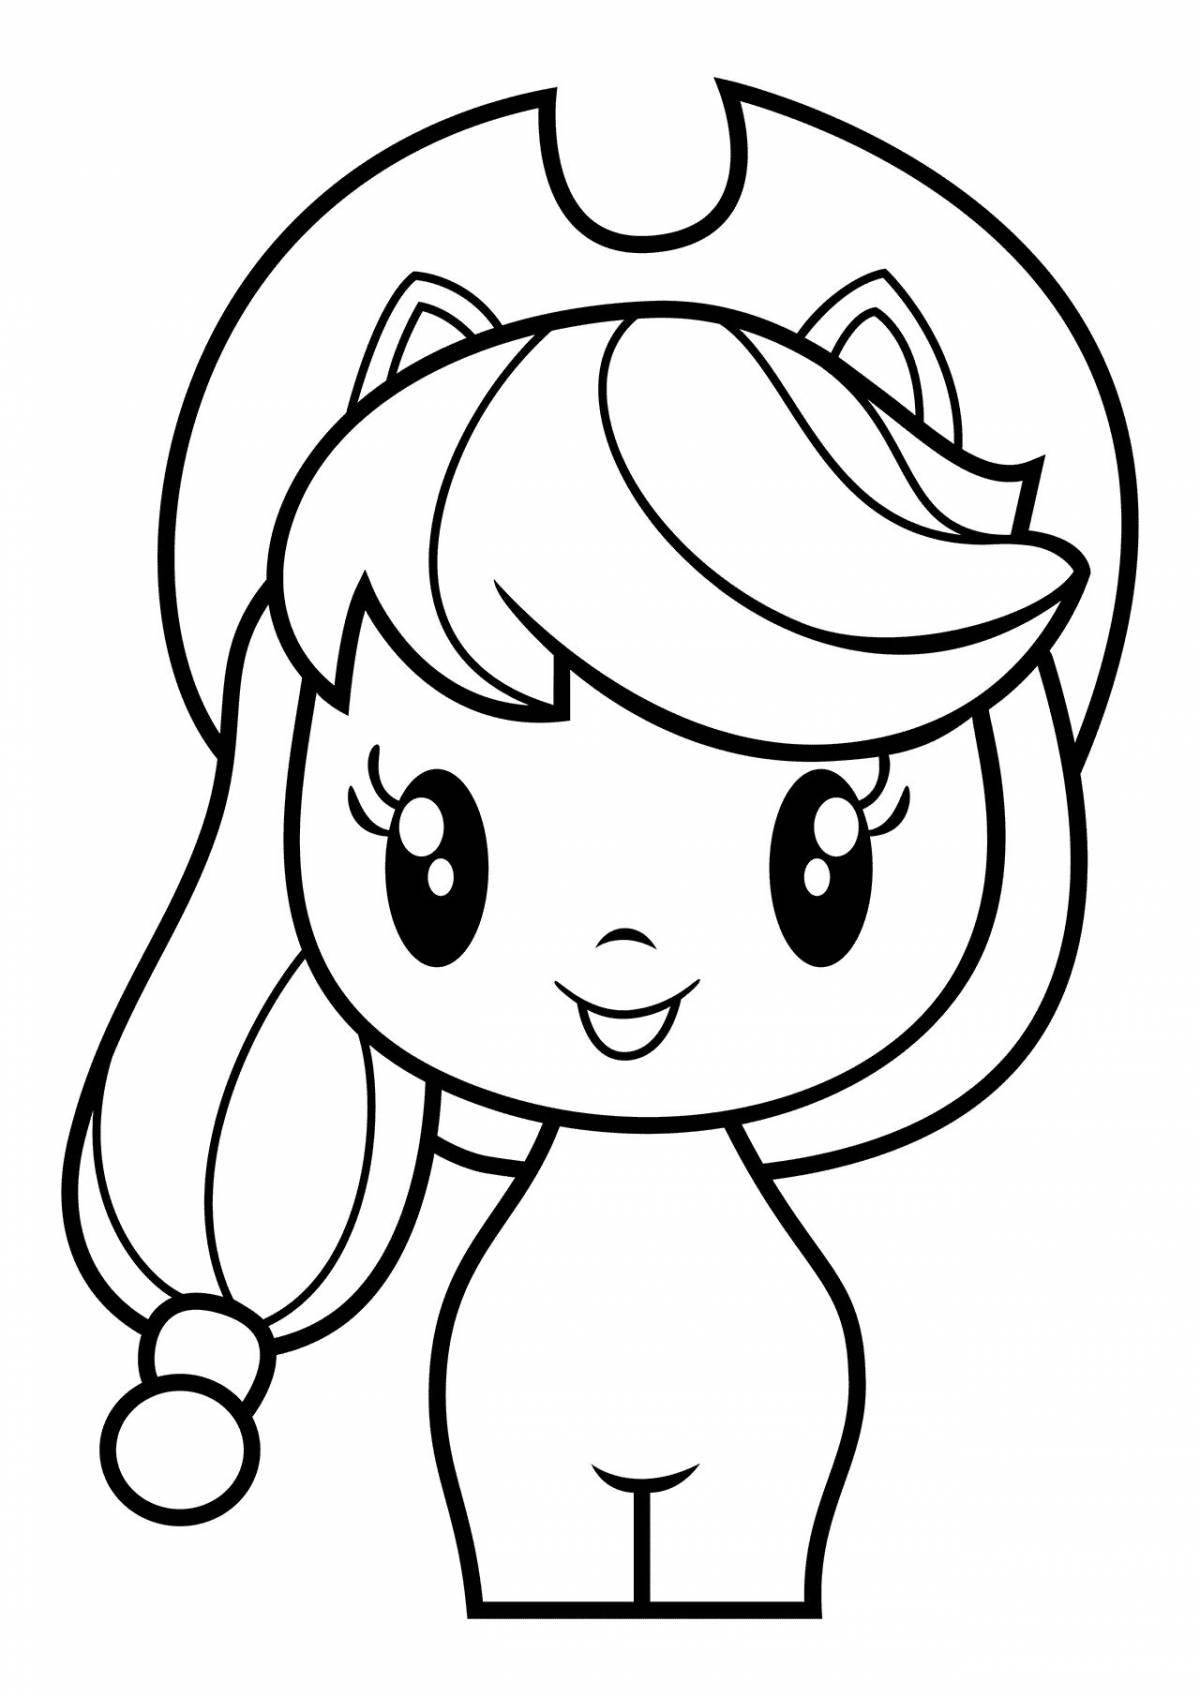 Sparkly pony coloring for kids